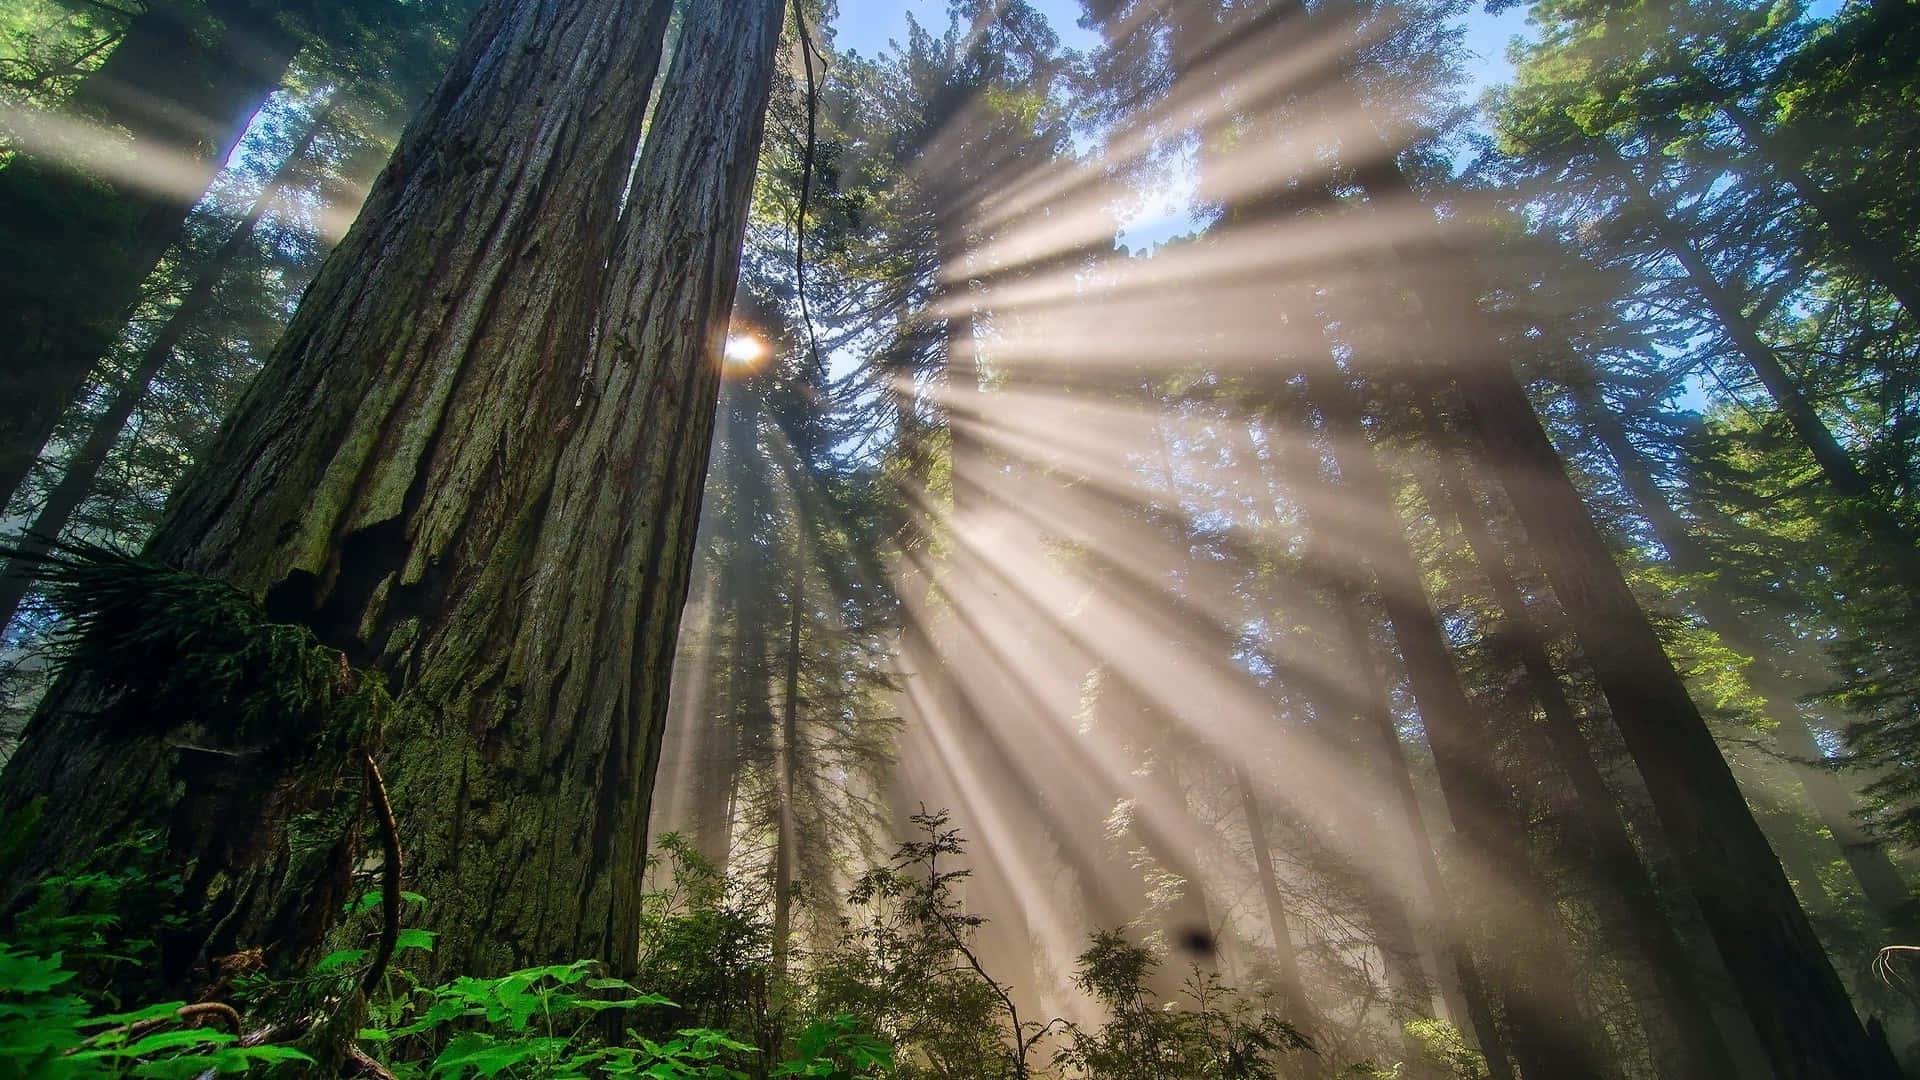 The majestic Redwood Trees of California